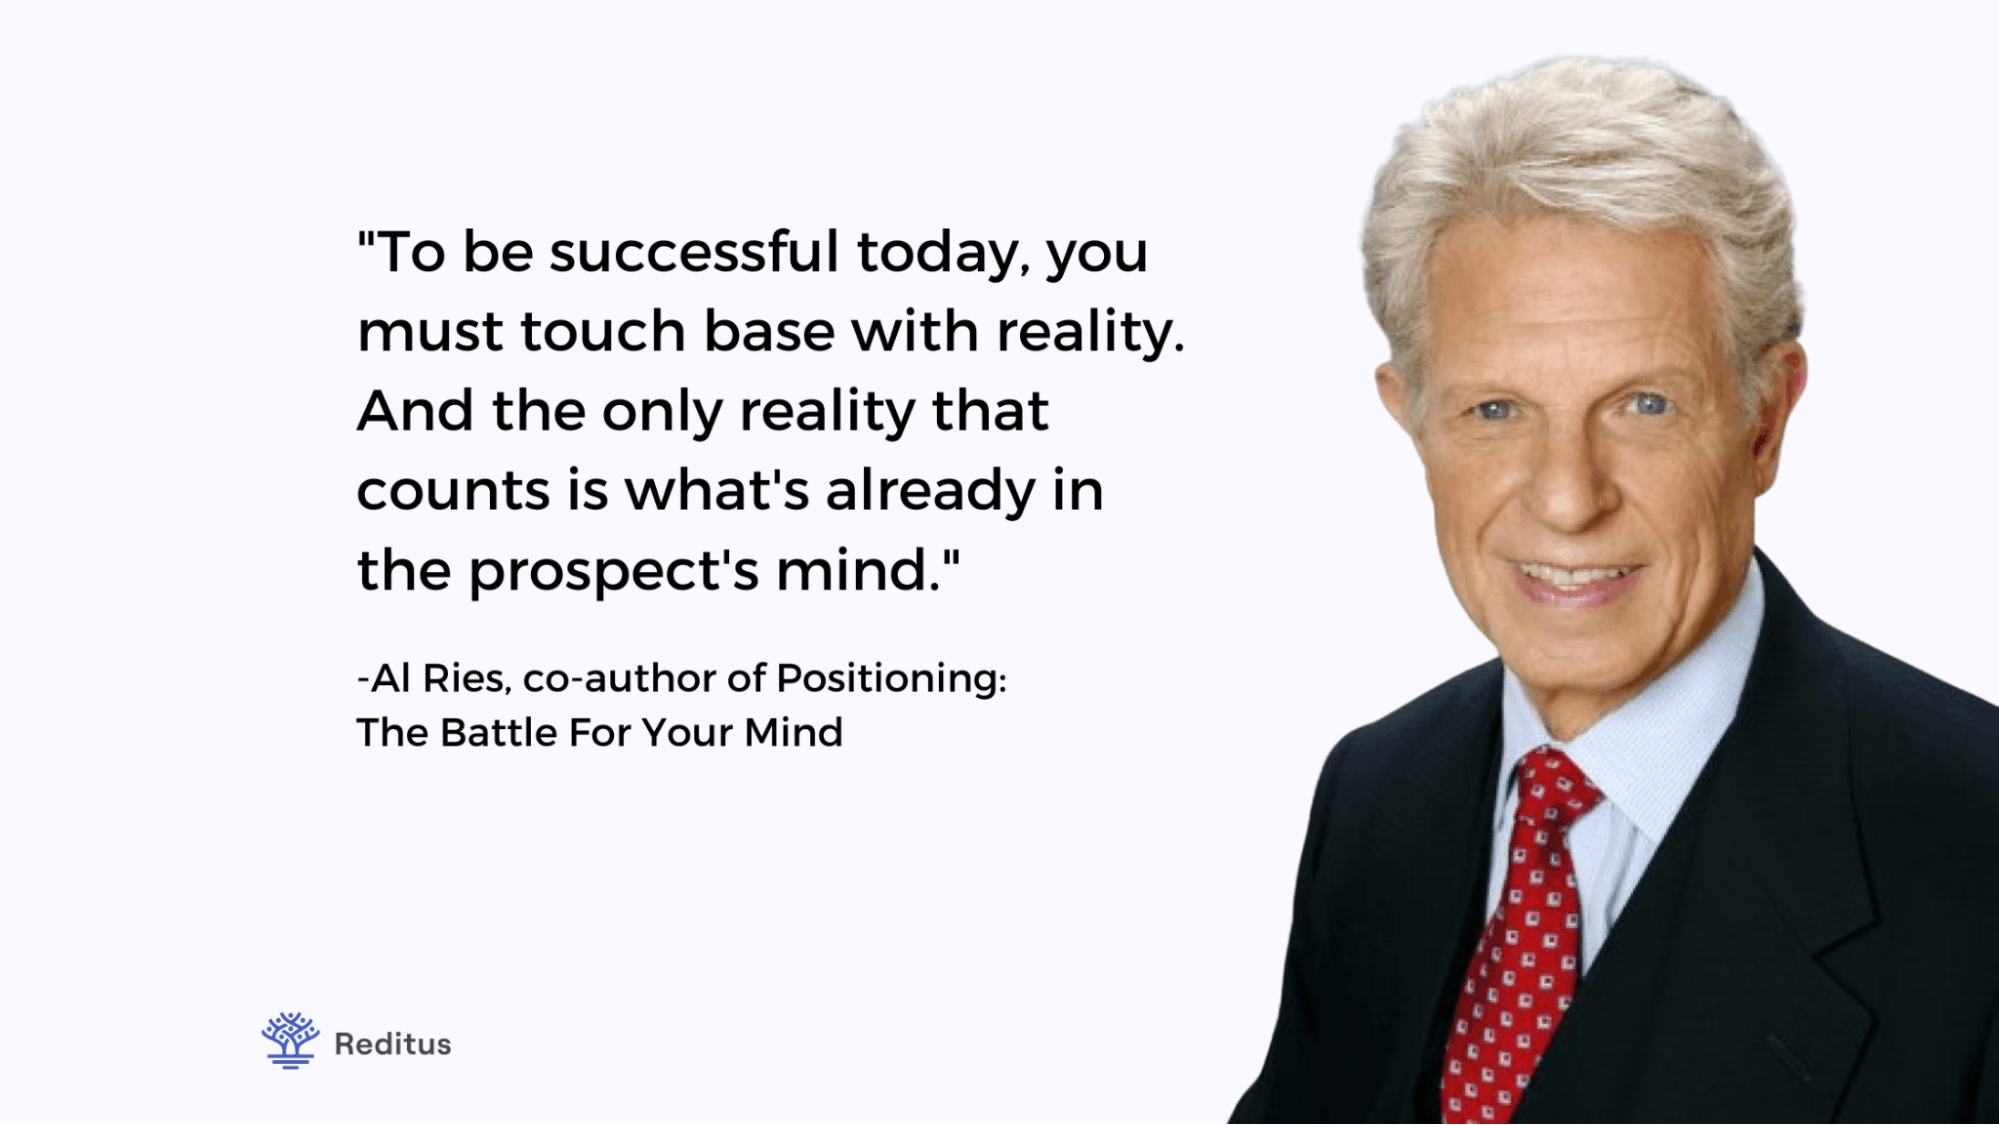 image showing an quote from Al Ries, the co-author of positioning: the battle for your mind. 